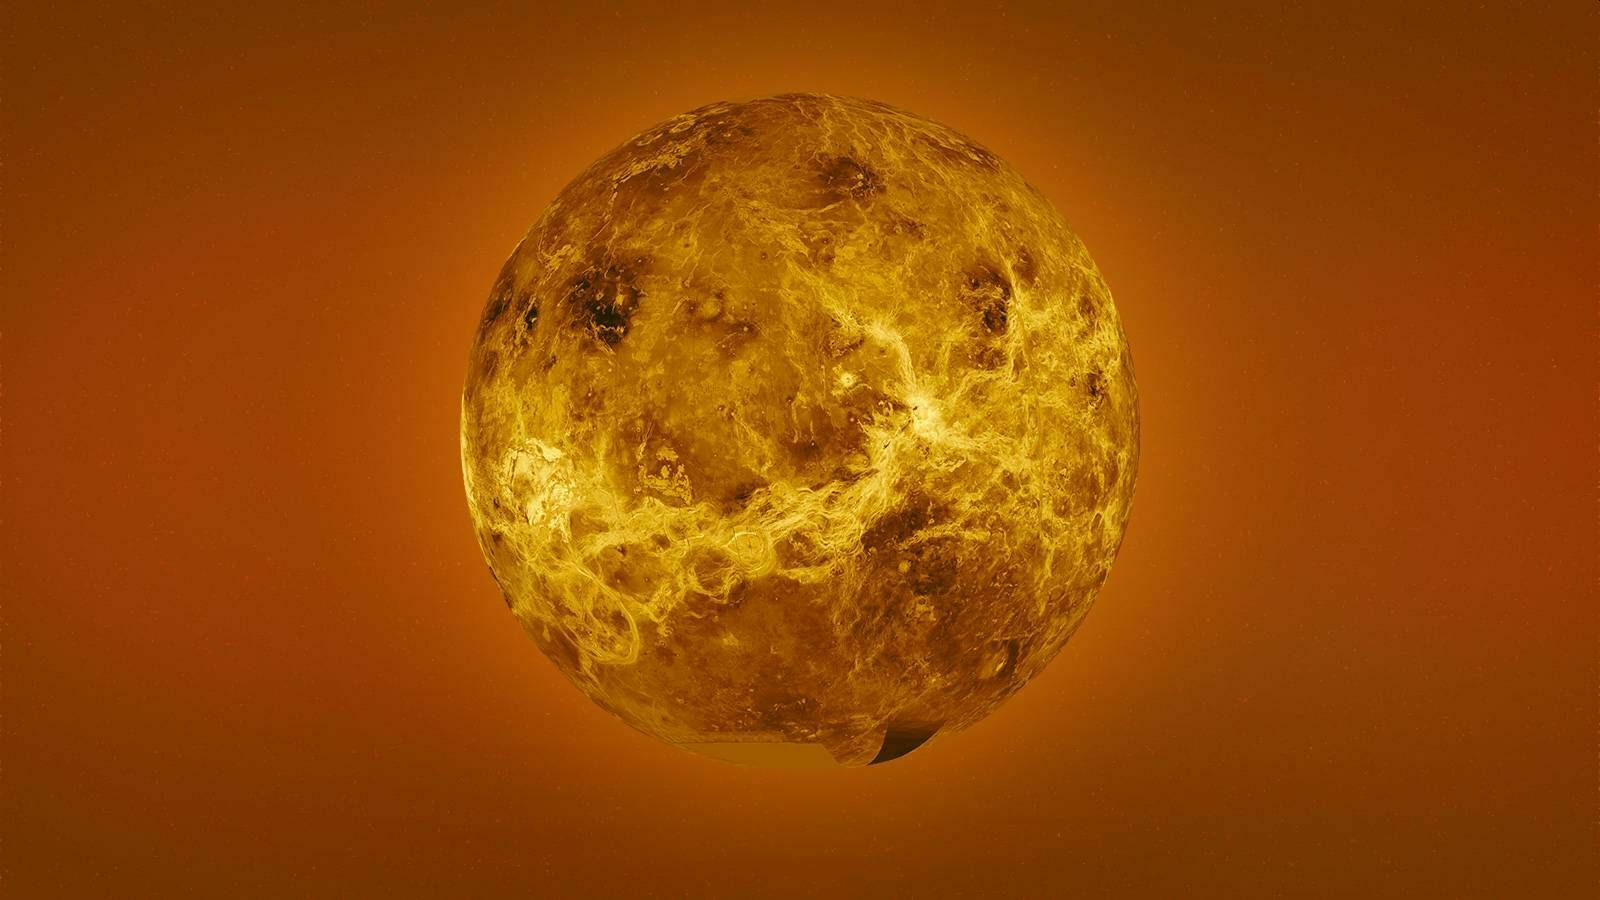 243.0226 Earth days: scientists find out how long a day lasts on Venus